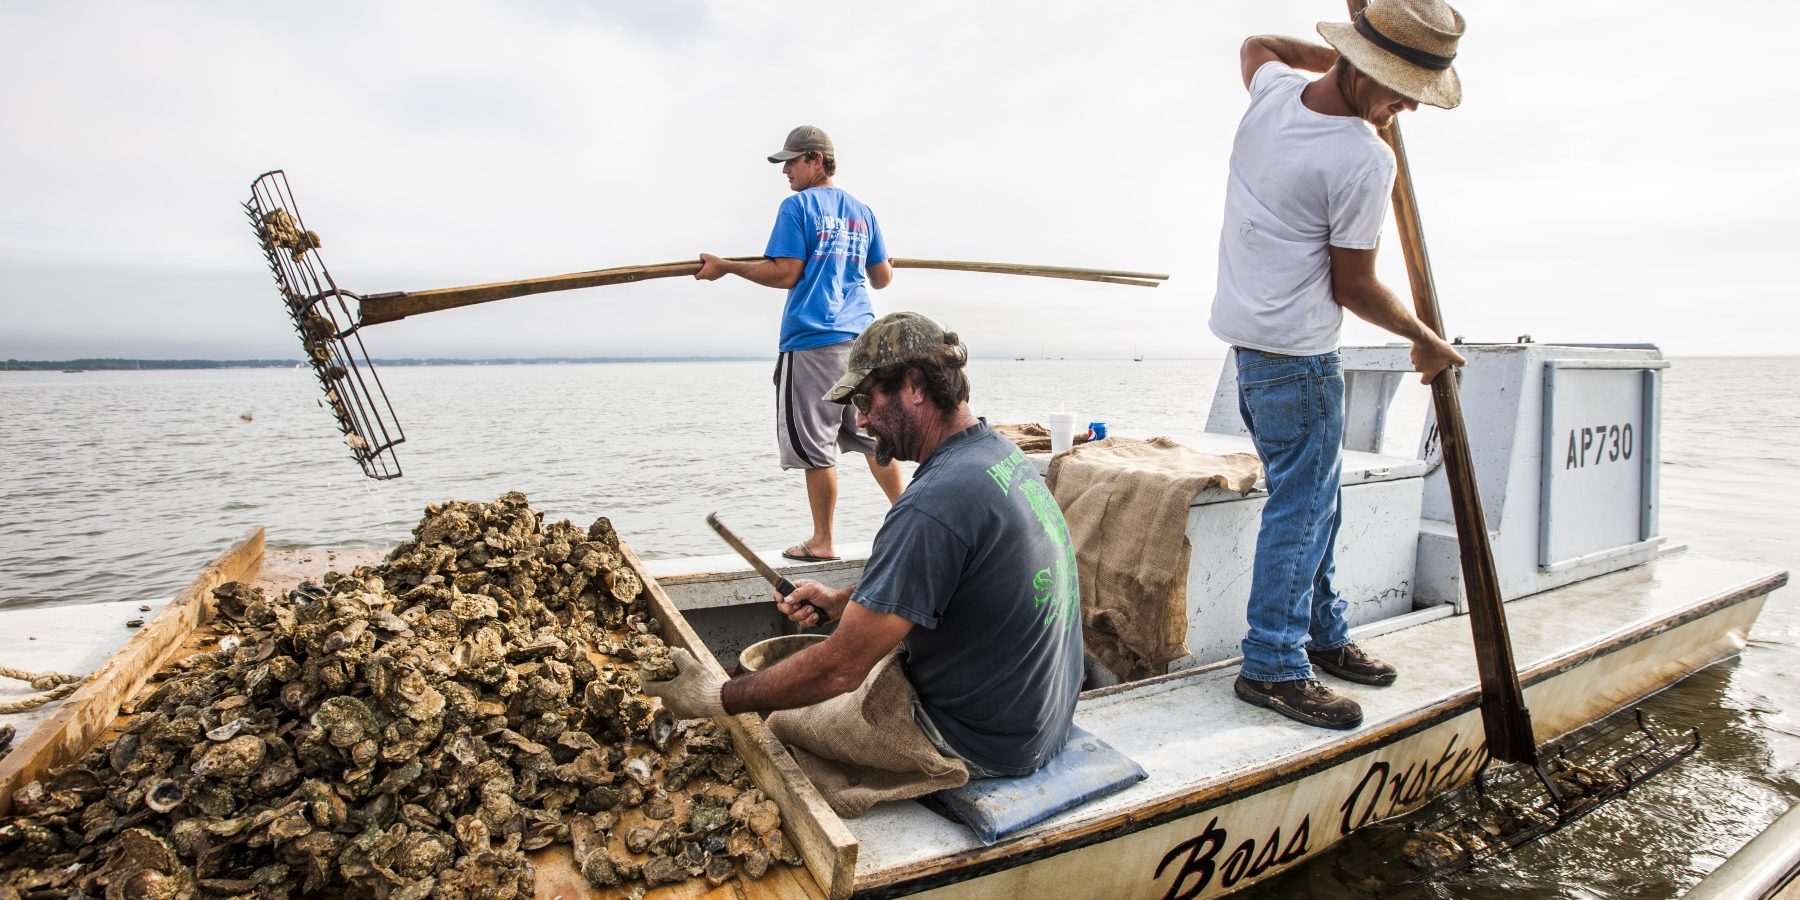 With Apalachicola River’s oyster fishery suffering in recent years, Florida said it’s because not enough water flows out of Georgia. Georgia has said the problems are due to Florida’s own mismanagement following the Gulf of Mexico oil spill. (Mark Wallheiser/Associated Press file)